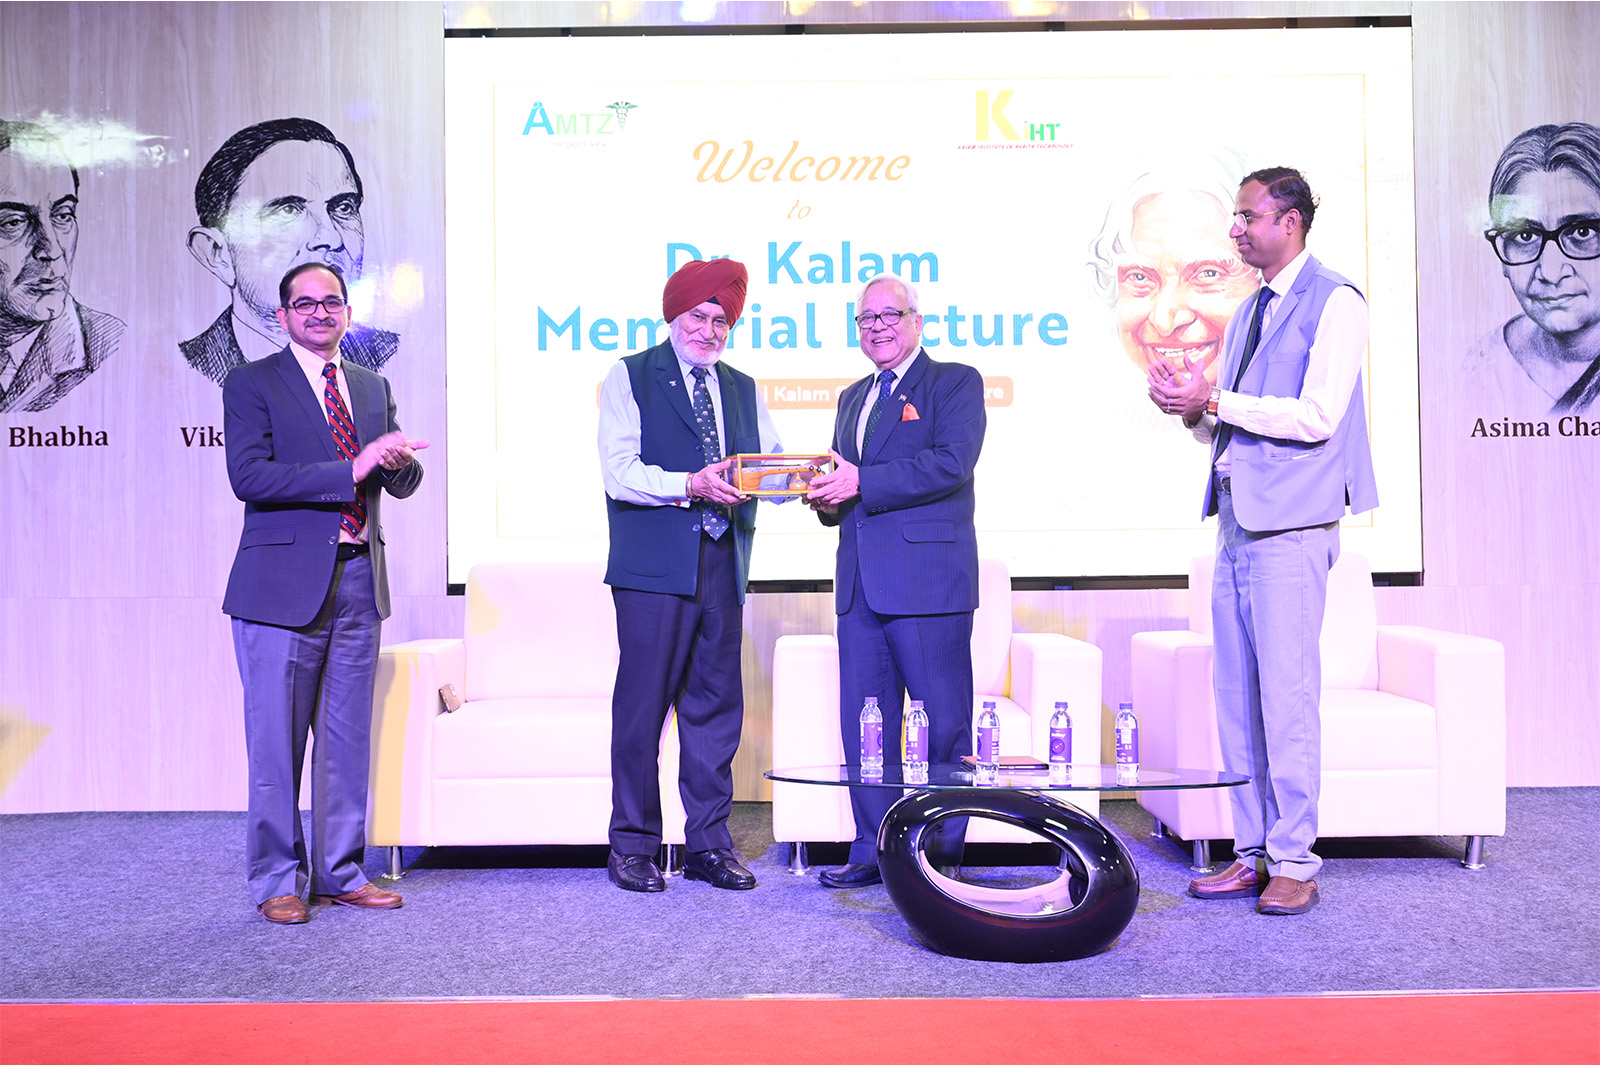 Dr. Jitendra Sharma, MD & Founder CEO of AMTZ, discusses Health Care Technology and MedTech Care Technology in India with Prof. Bejon Kumar Misra, International Consumer Policy Expert, during the Dr. Kalam Memorial Lecture session